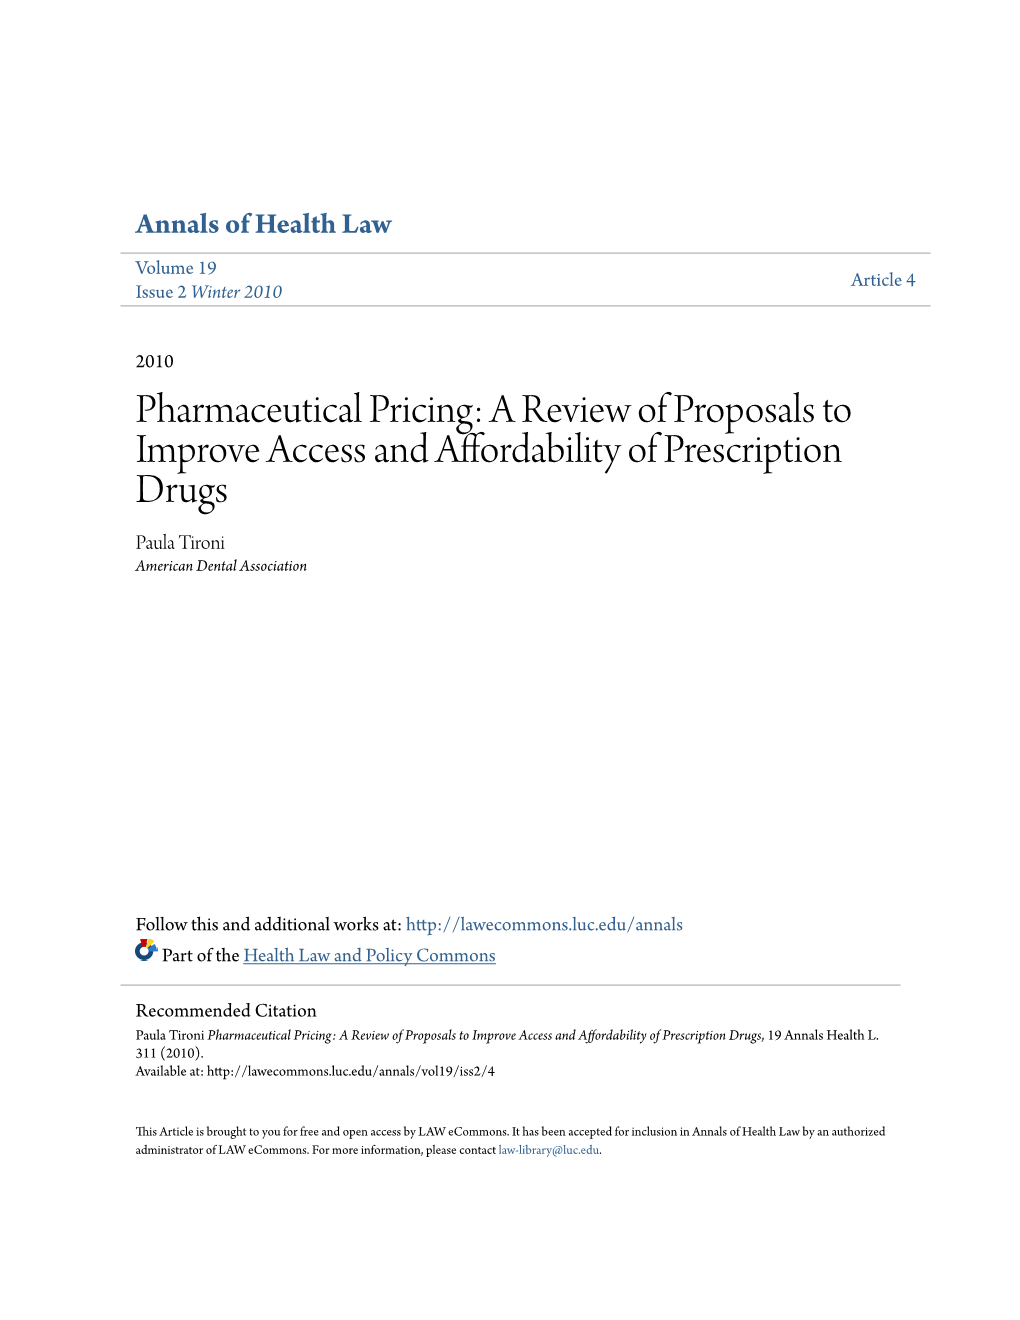 Pharmaceutical Pricing: a Review of Proposals to Improve Access and Affordability of Prescription Drugs Paula Tironi American Dental Association